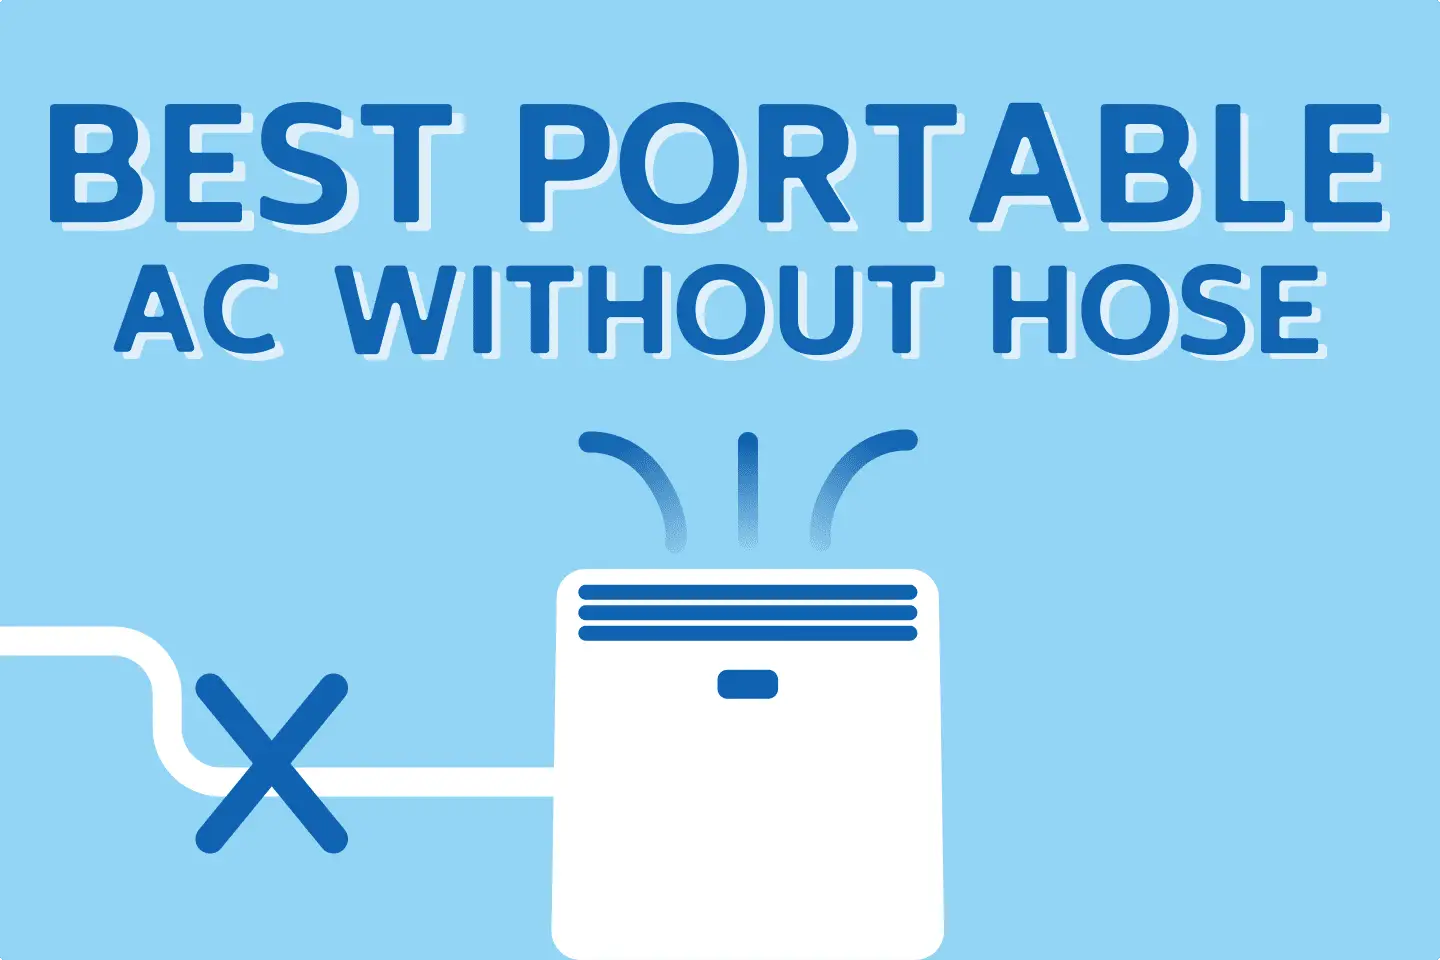 5 Best Portable Air Conditioners Without Hose